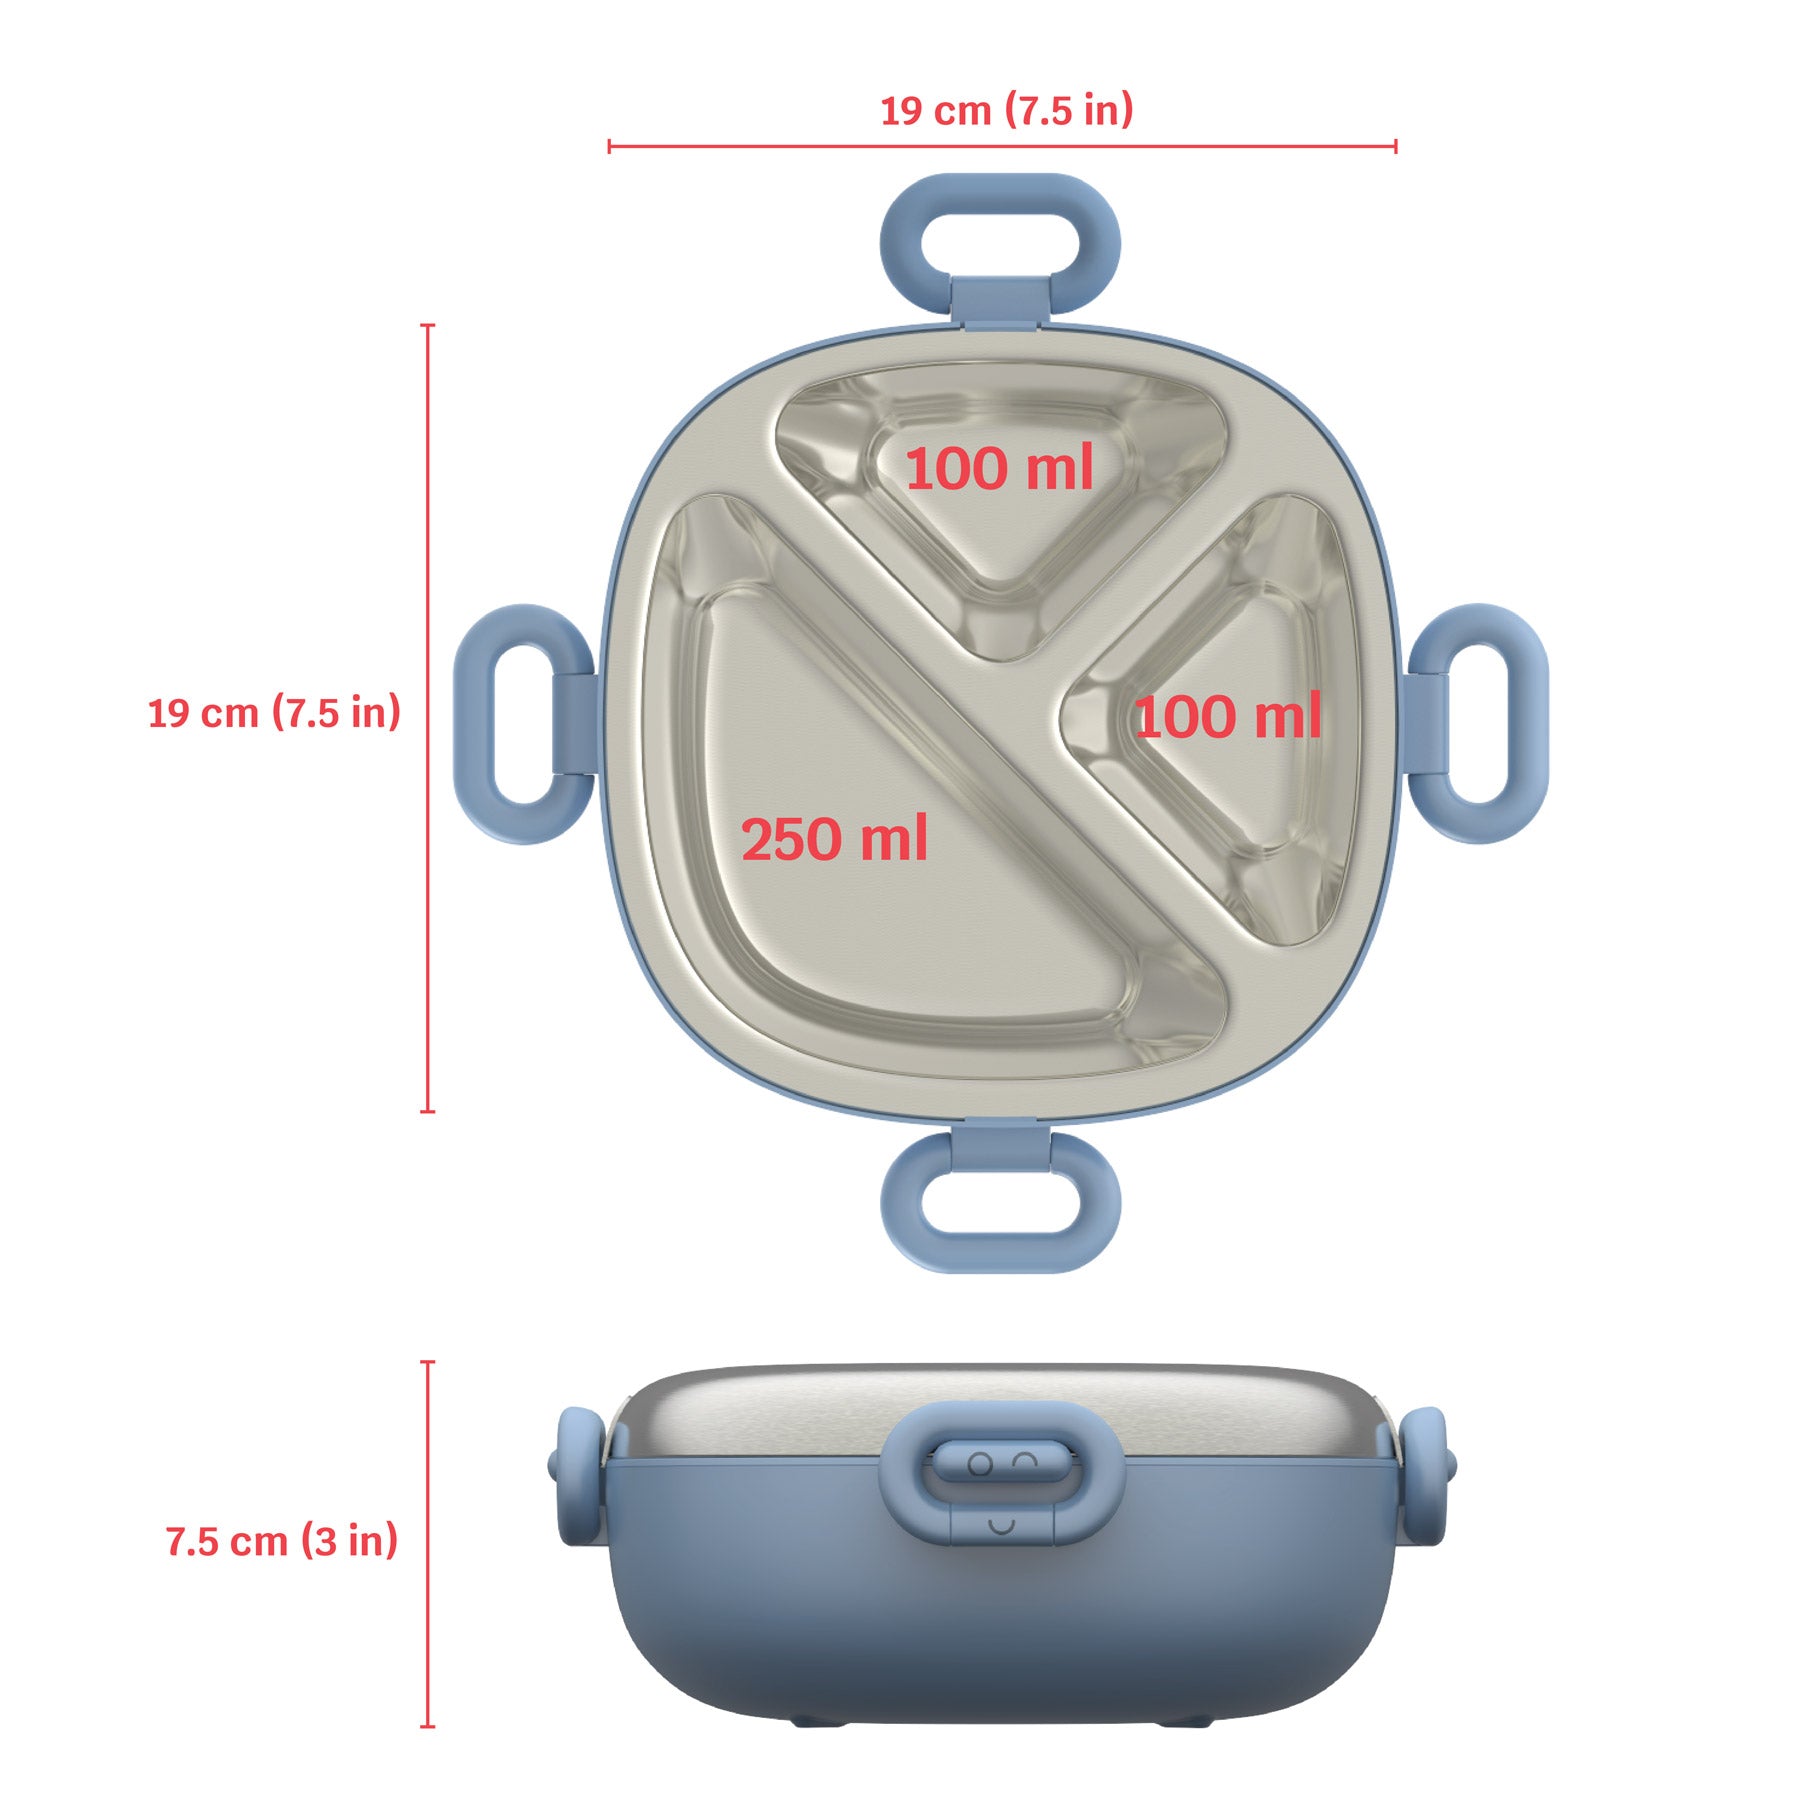 Dimensional view of Winck Stainless Steel Bento Box, measuring 19 cm in width and length with a depth of 7.5 cm, featuring compartments with capacities of 100 ml each and a larger 250 ml section, ideal for kids lunches.